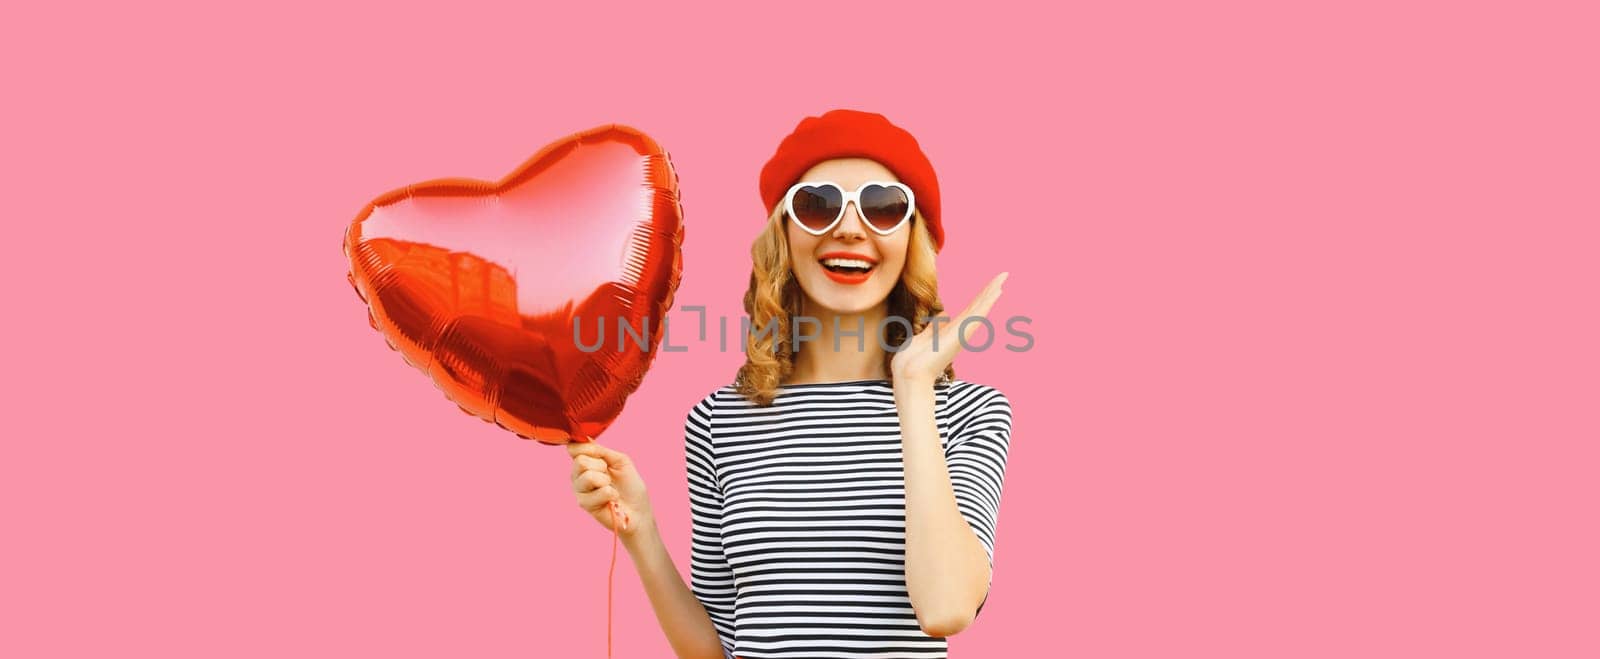 Cute portrait of happy cheerful smiling young woman with red heart shaped balloon wearing french beret hat on pink studio background